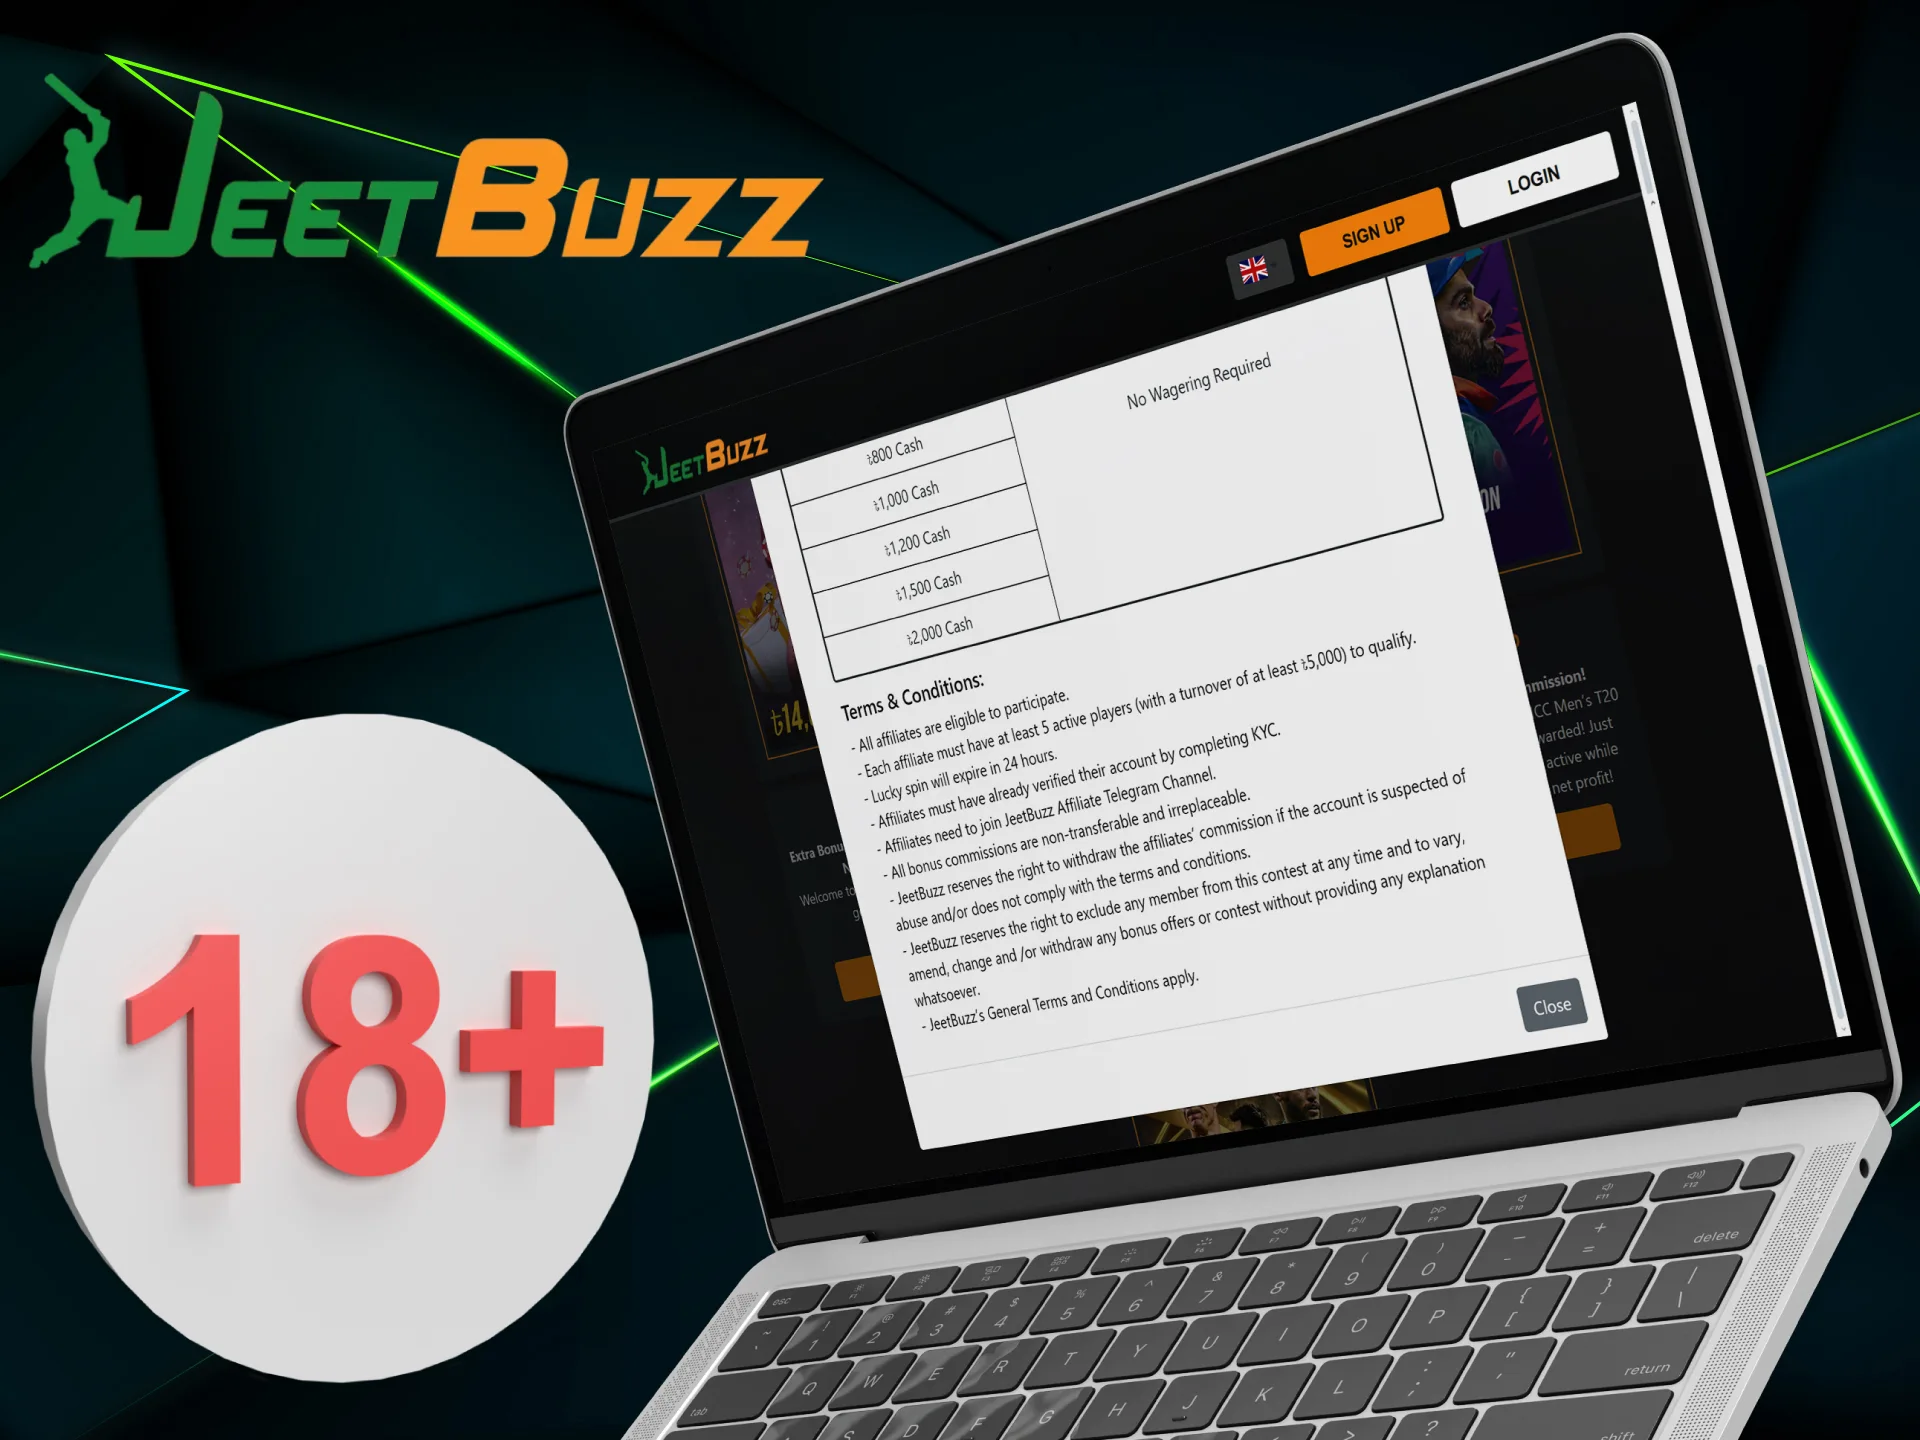 Read the terms and conditions of the JeetBuzz Bangladesh affiliate program.